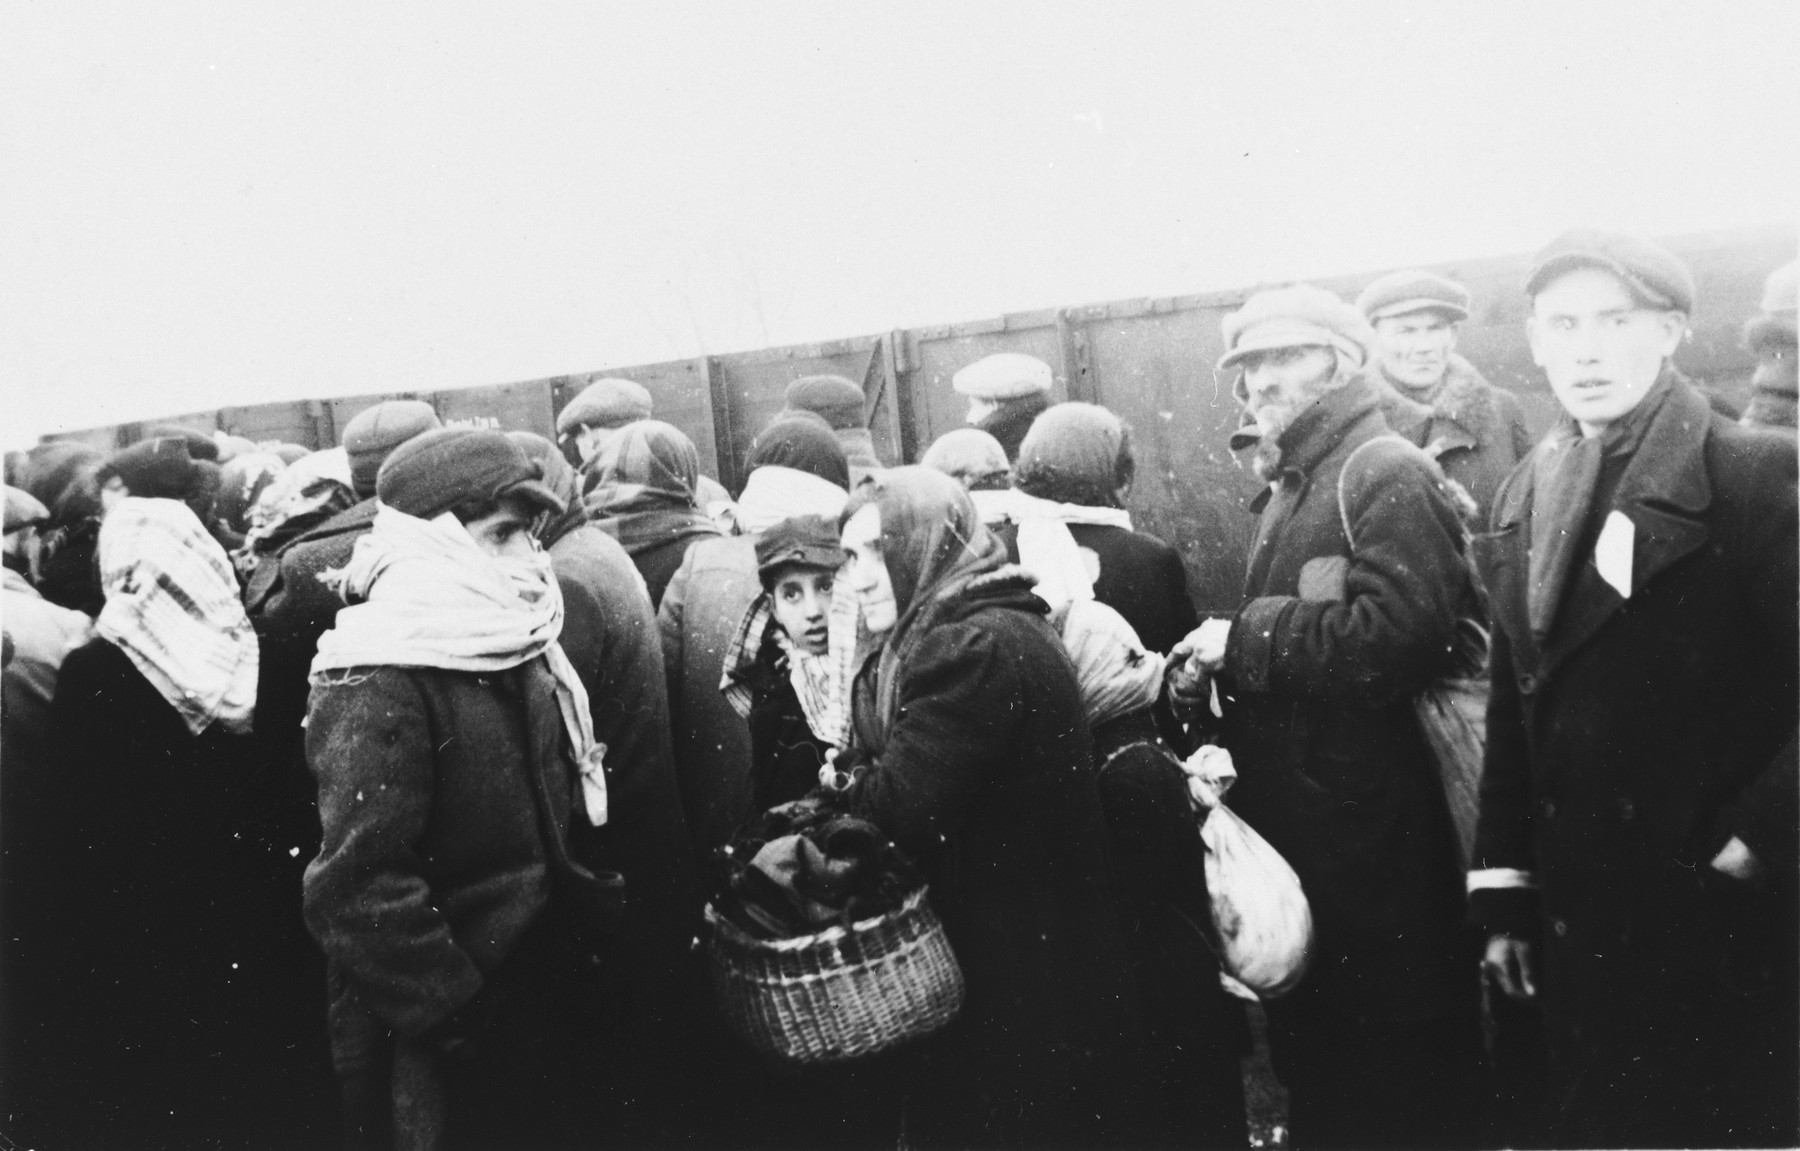 Jews who have been expelled from the town of Plock are resettled in Chmielnik.